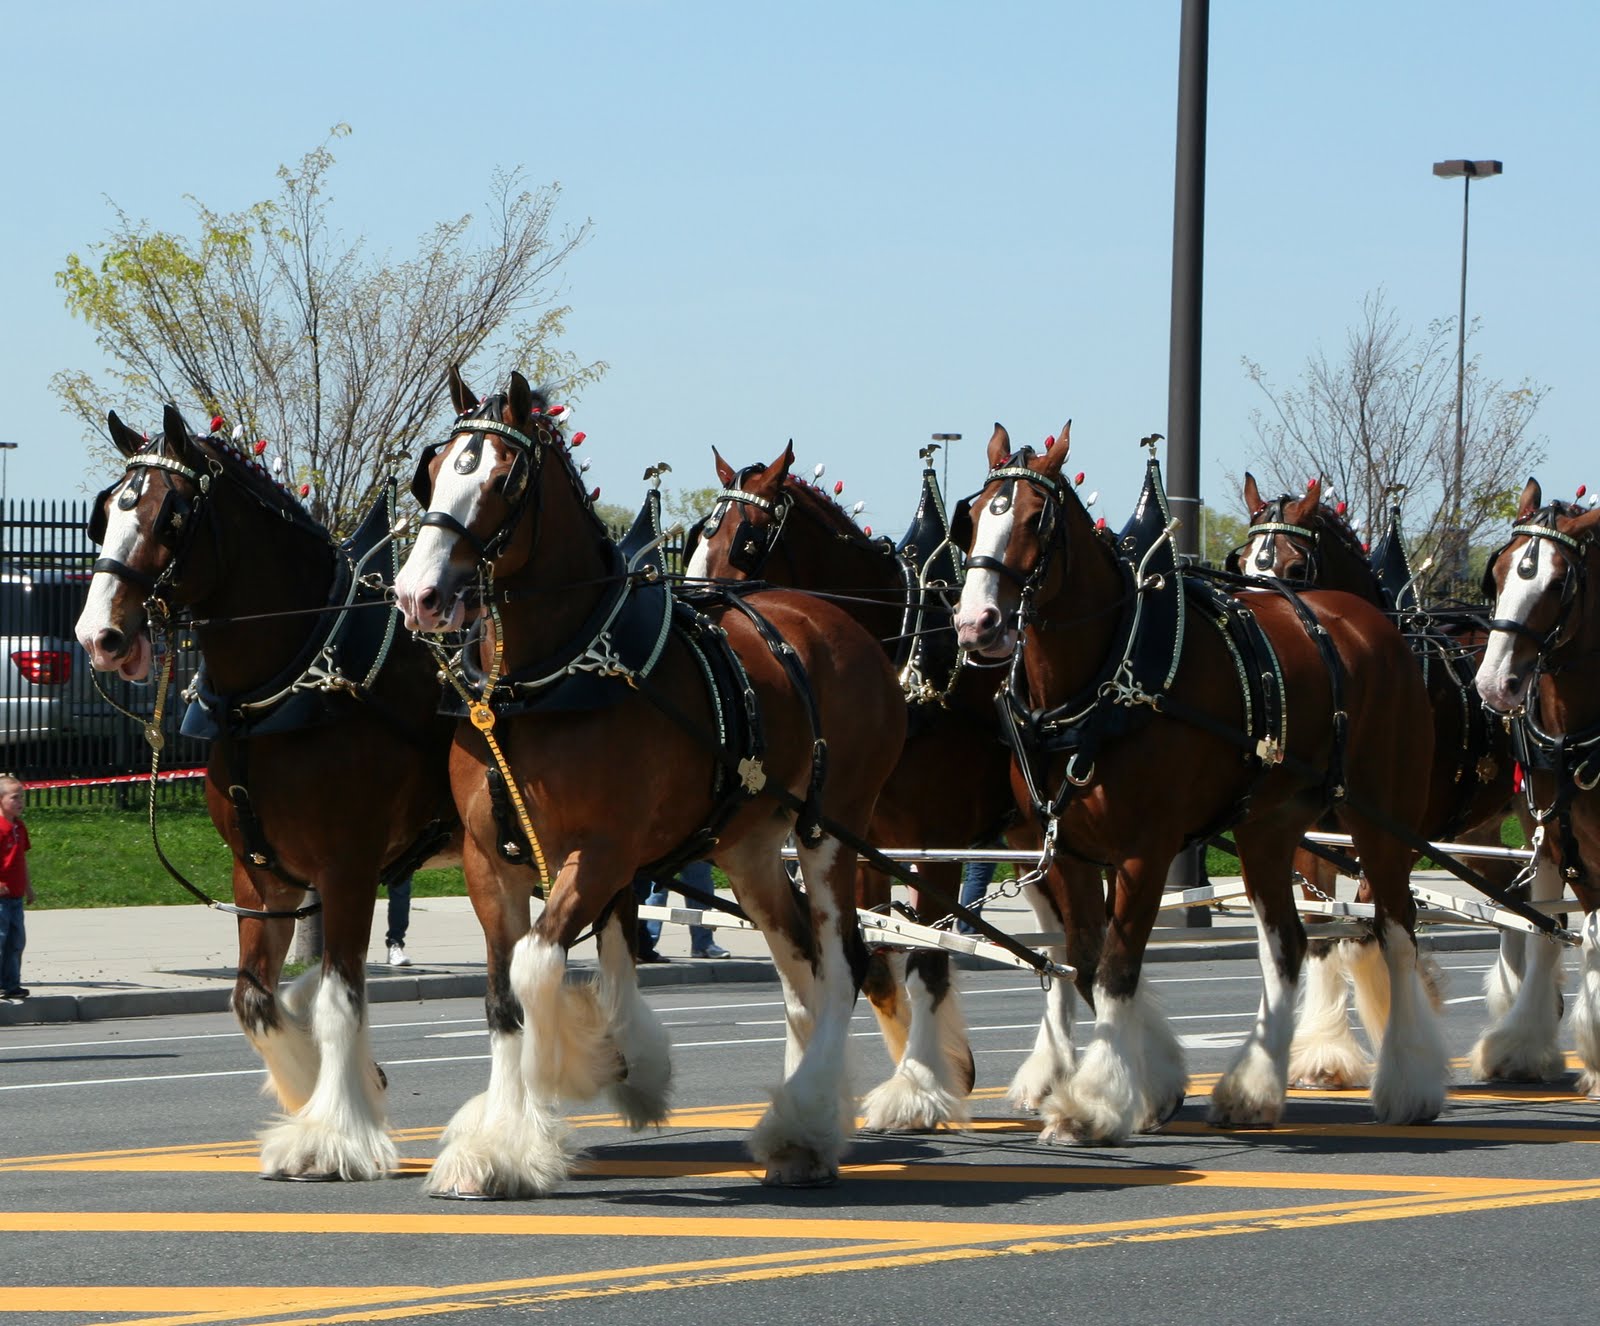 Clydesdale Horses Wallpaper